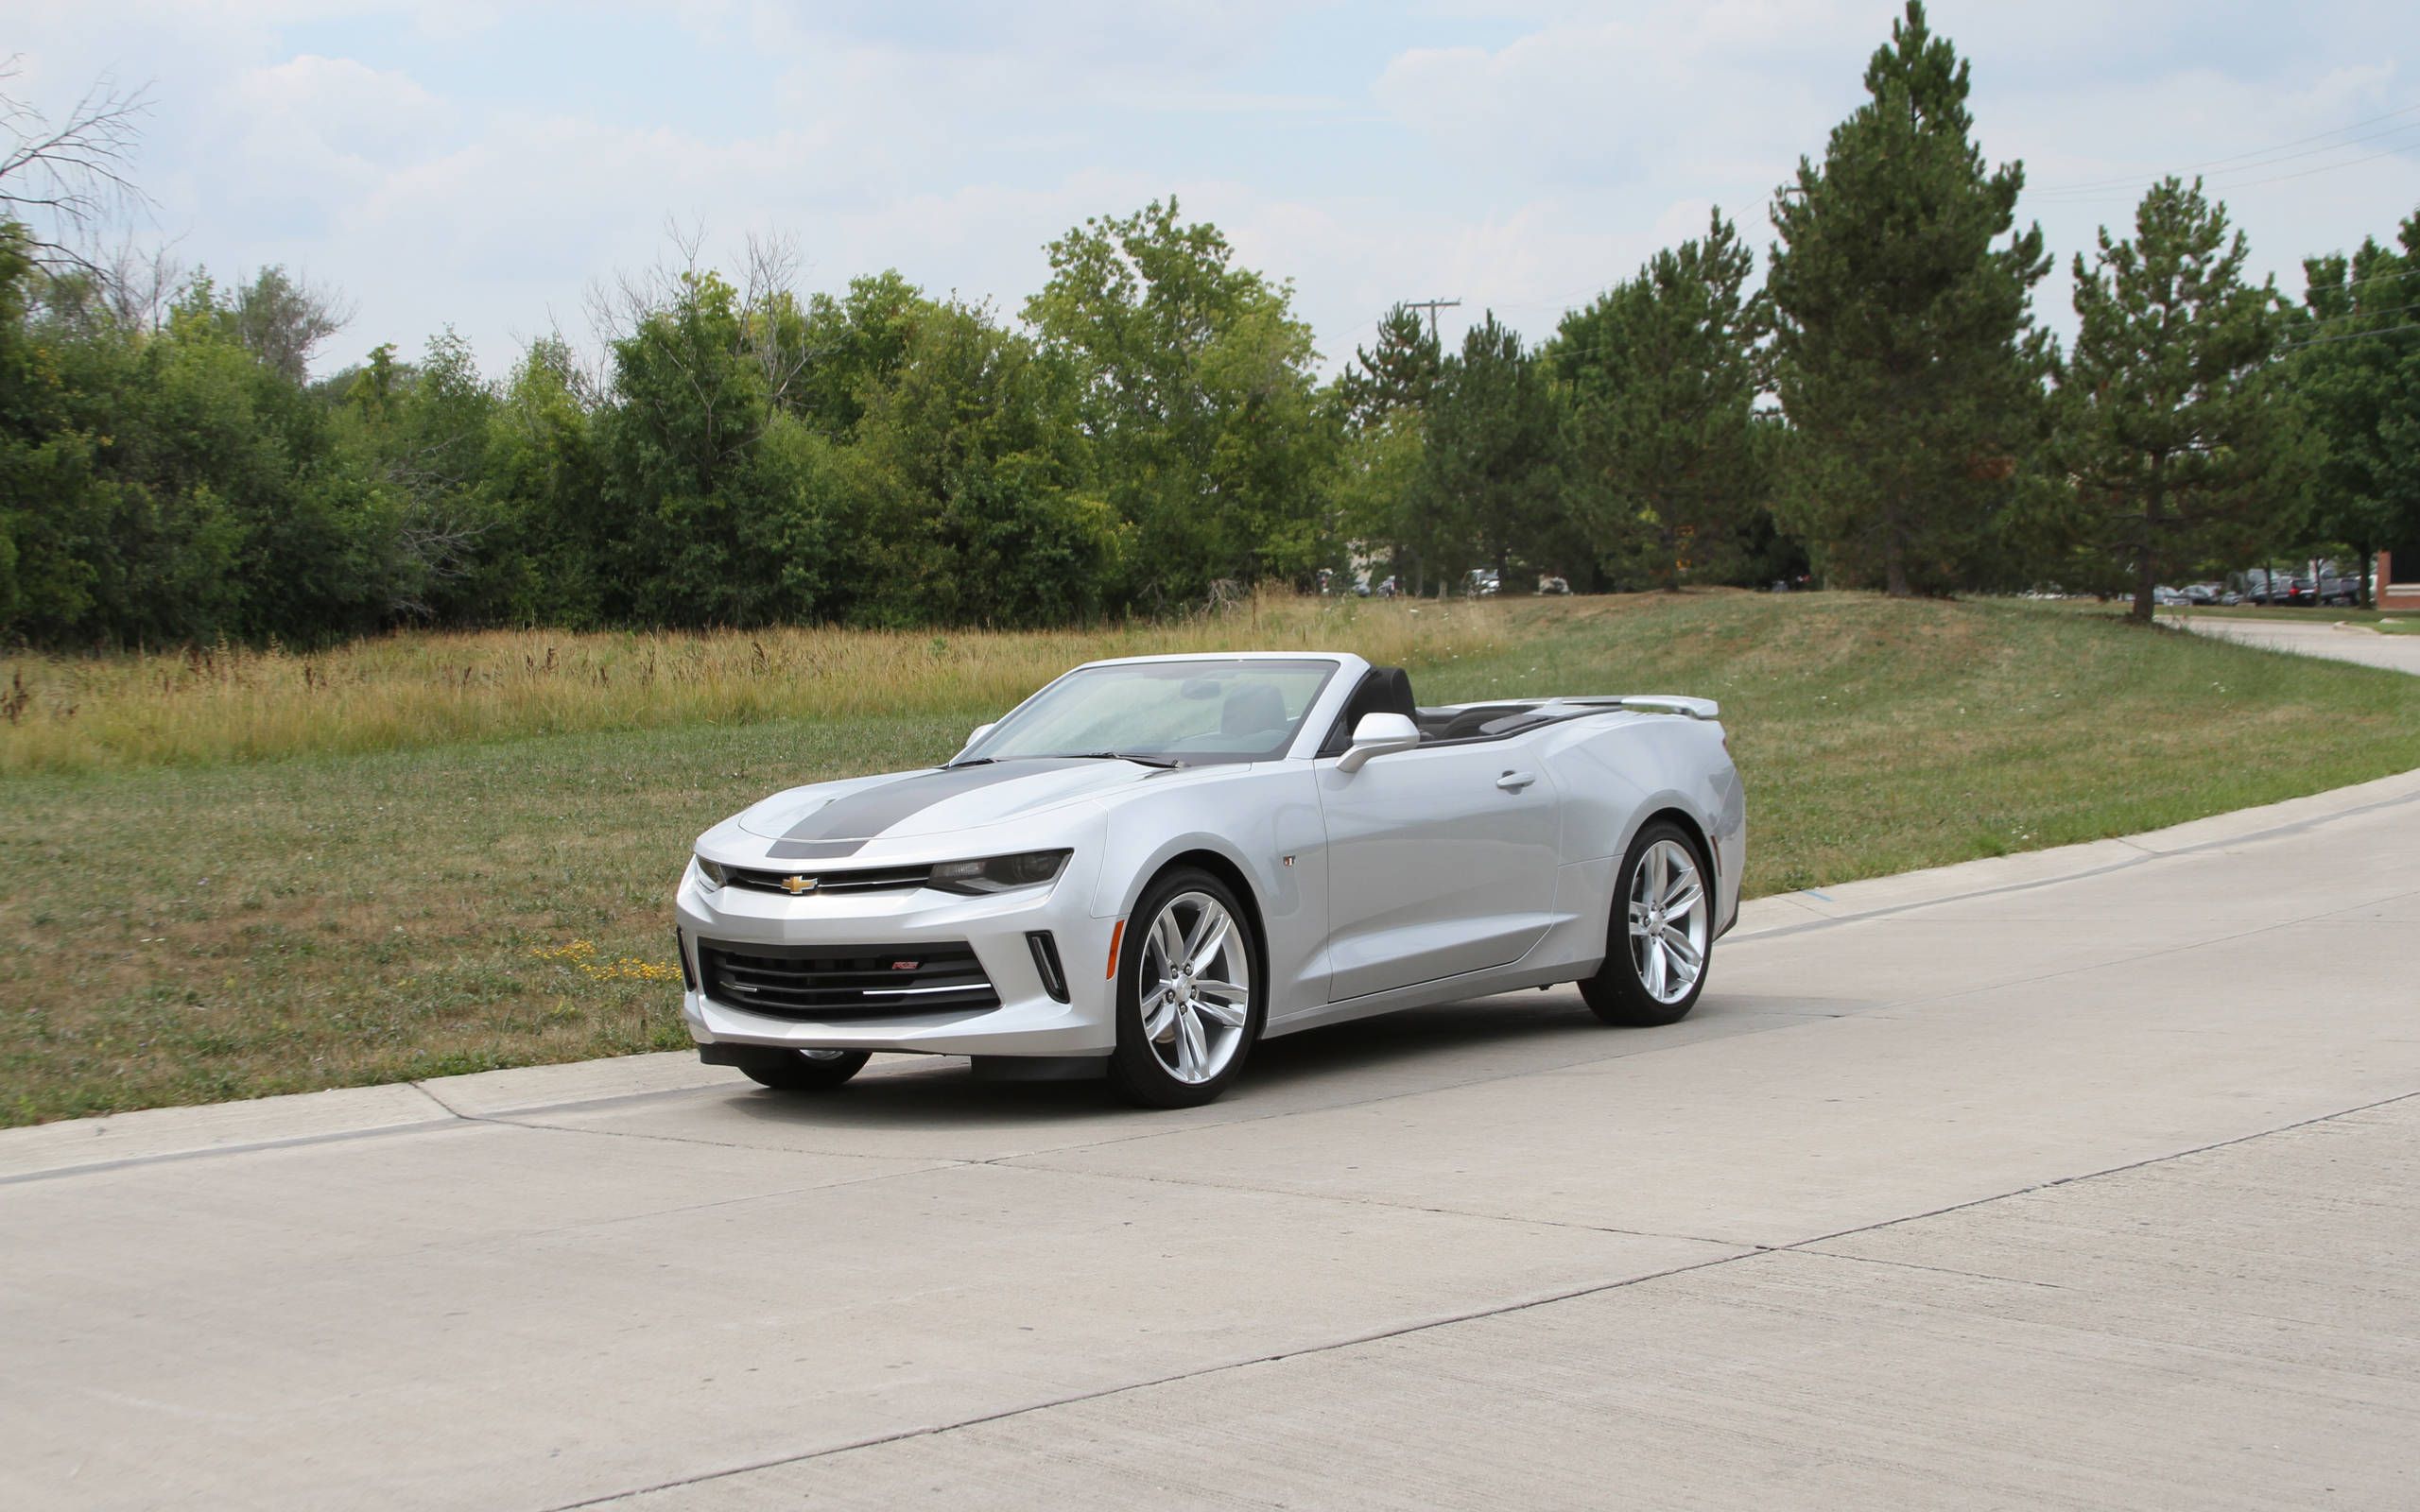 2016 Chevrolet Camaro convertible review: Getting the formula right